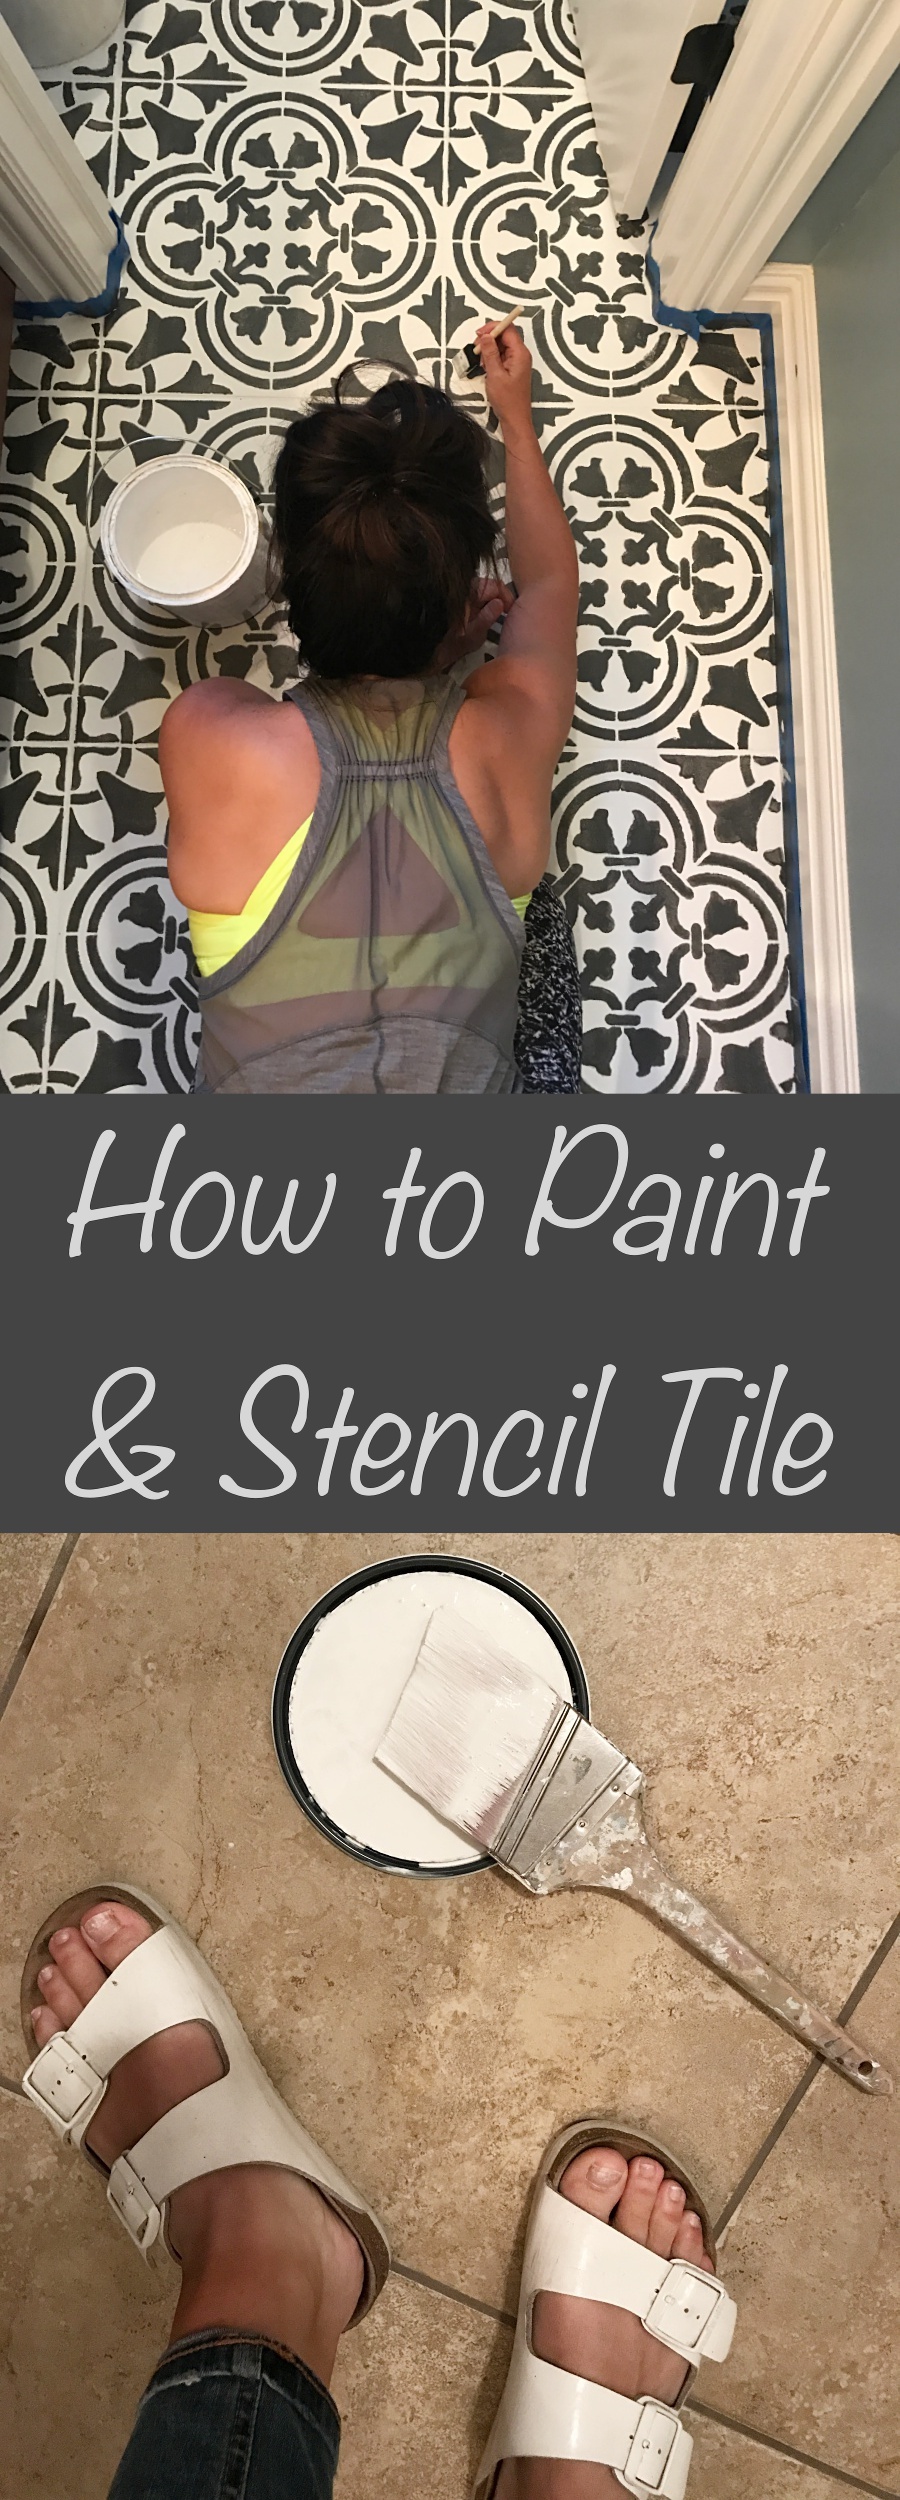 How to paint and stencil tile...Cement tile look-a-like